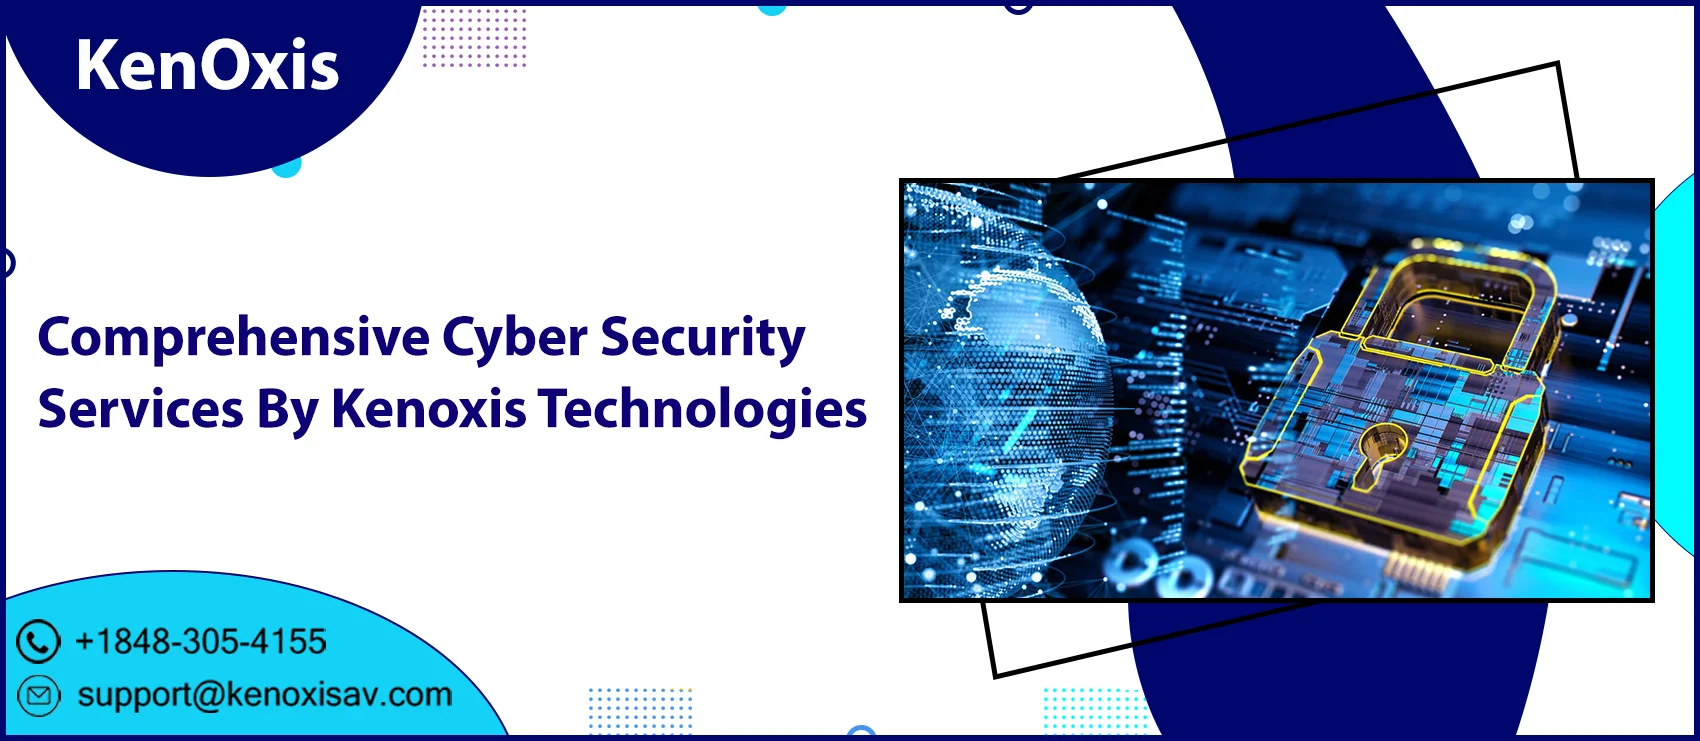 Comprehensive Cyber Security Services By Kenoxis Technologies